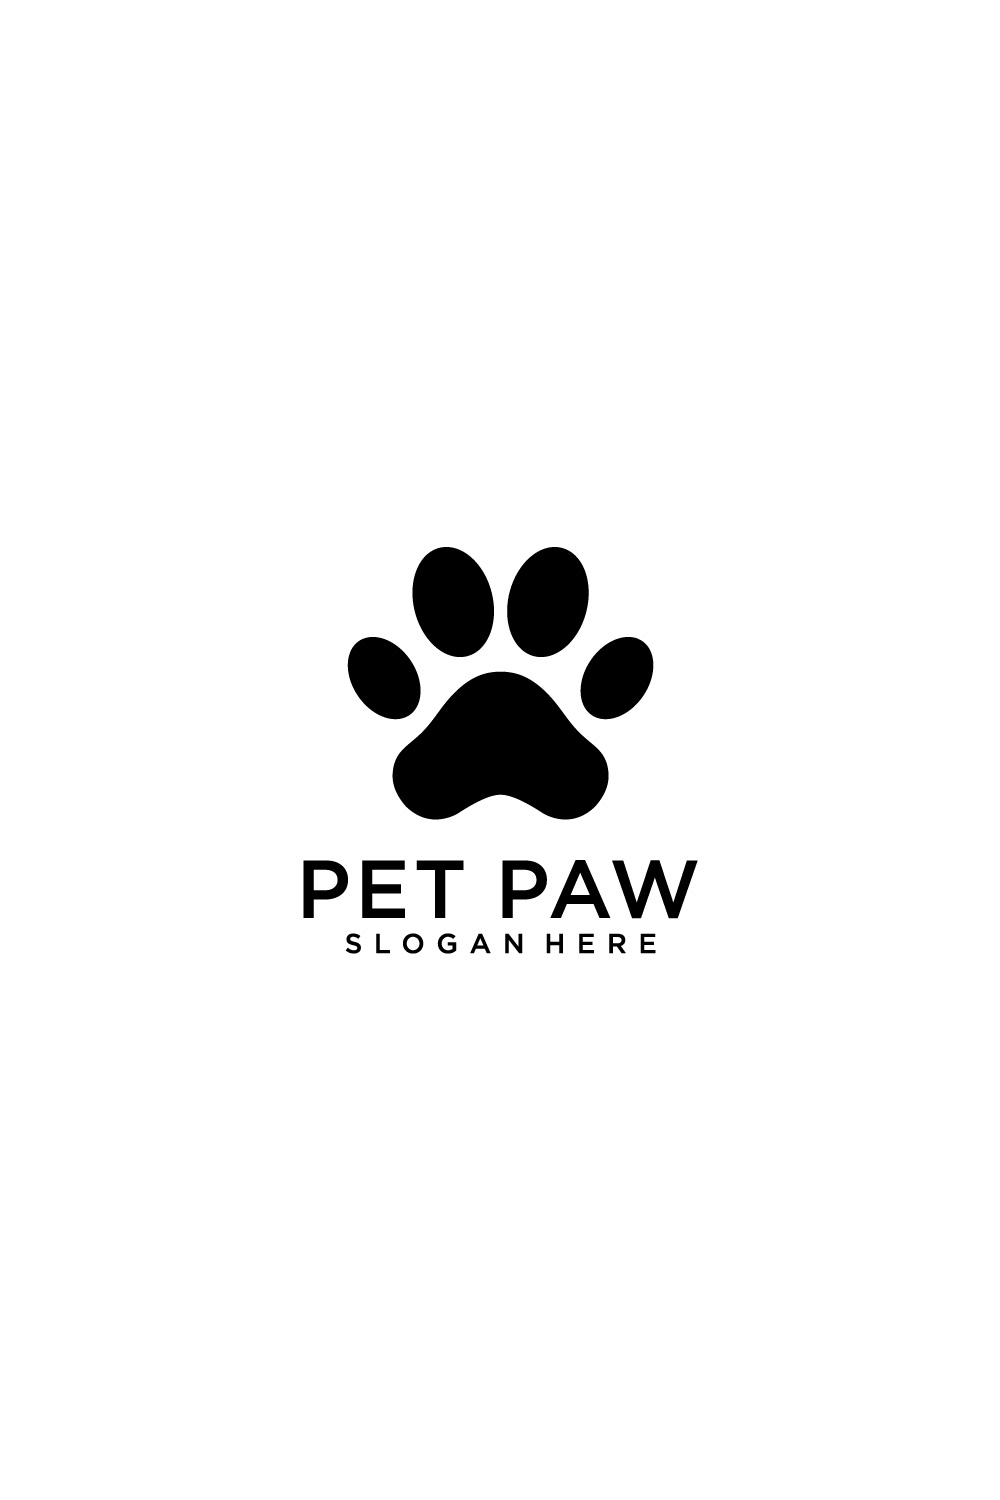 silhouette of dog paws logo vector pinterest preview image.